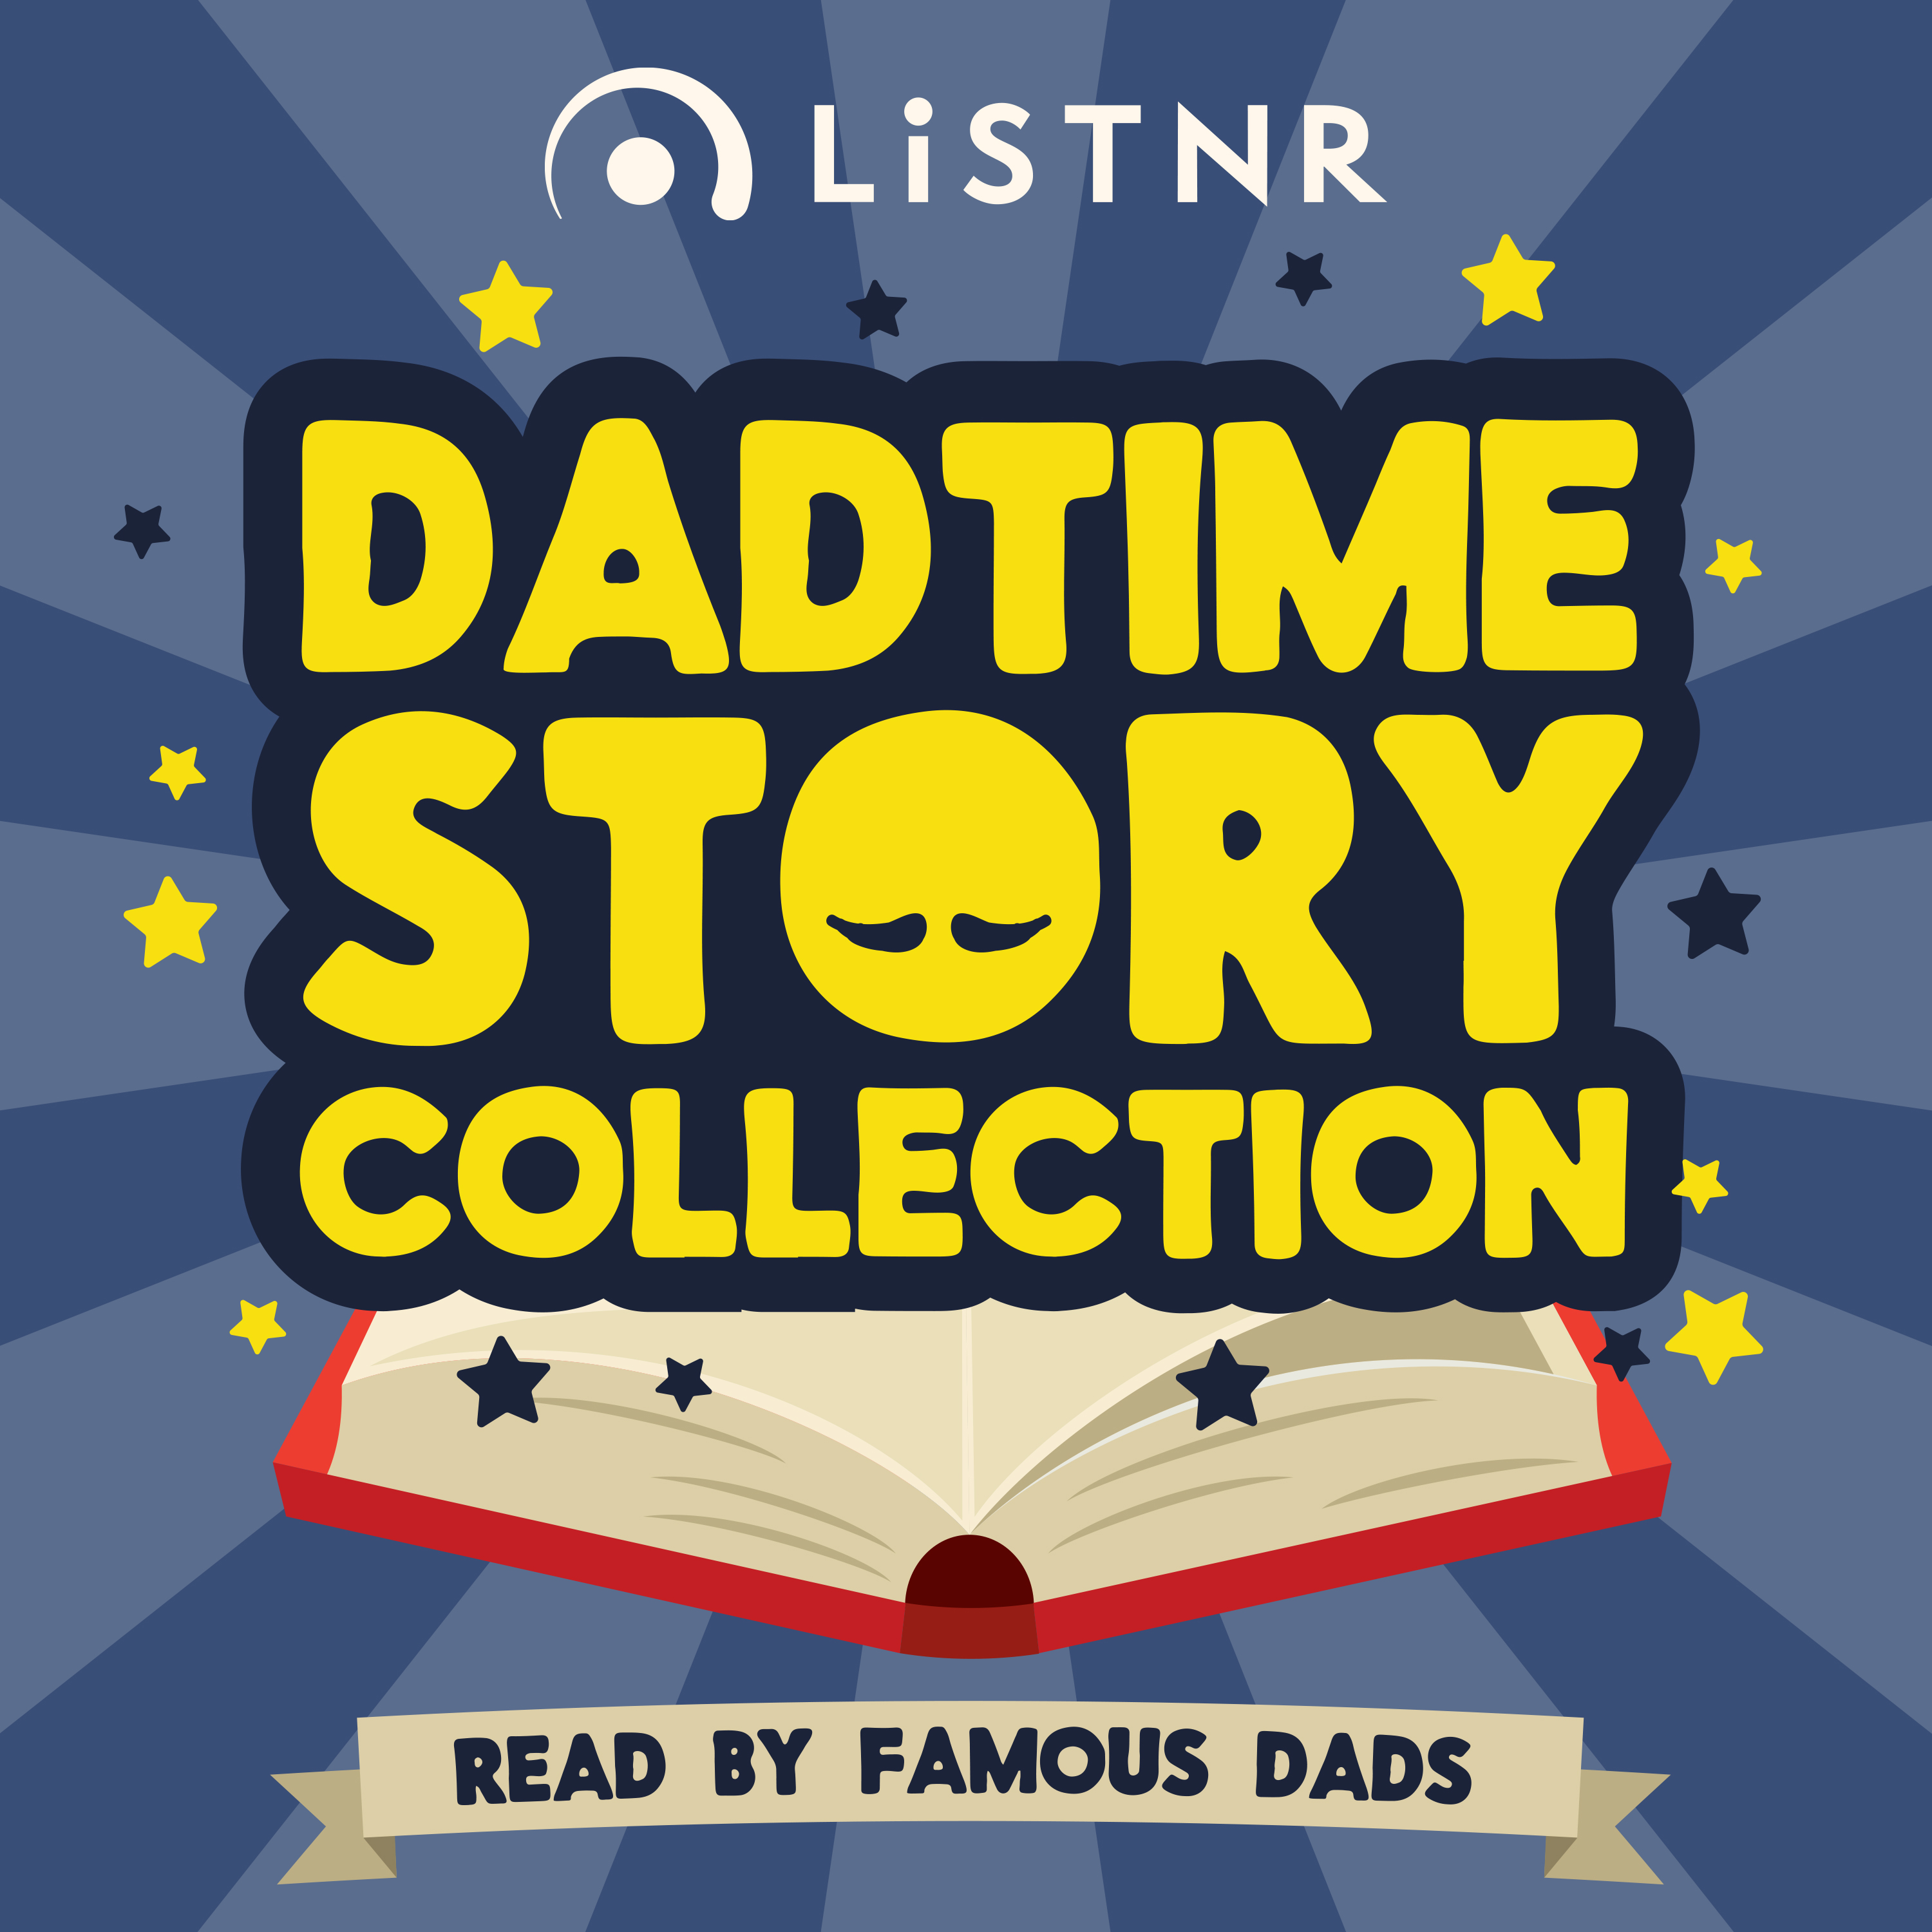 Dadtime Story Collection Trailer